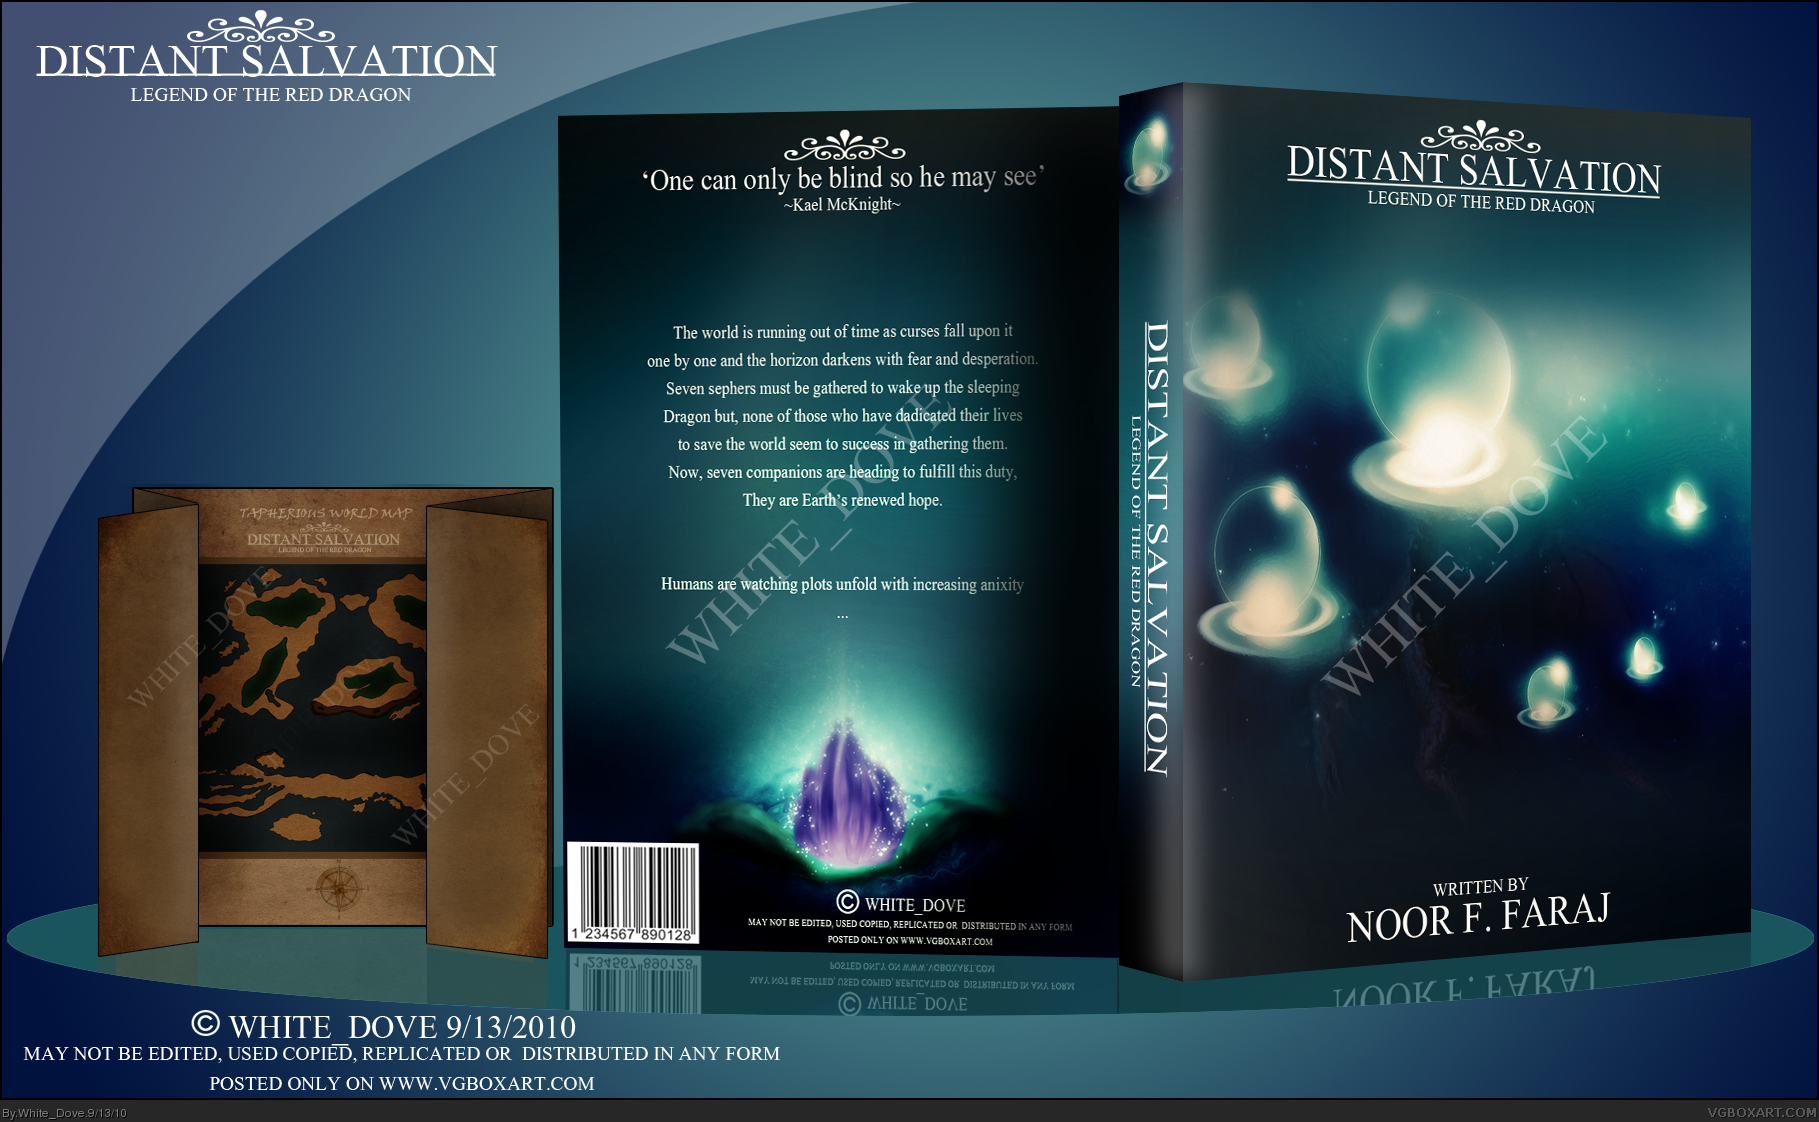 Distant Salvation: Legend of the Red Dragon box cover